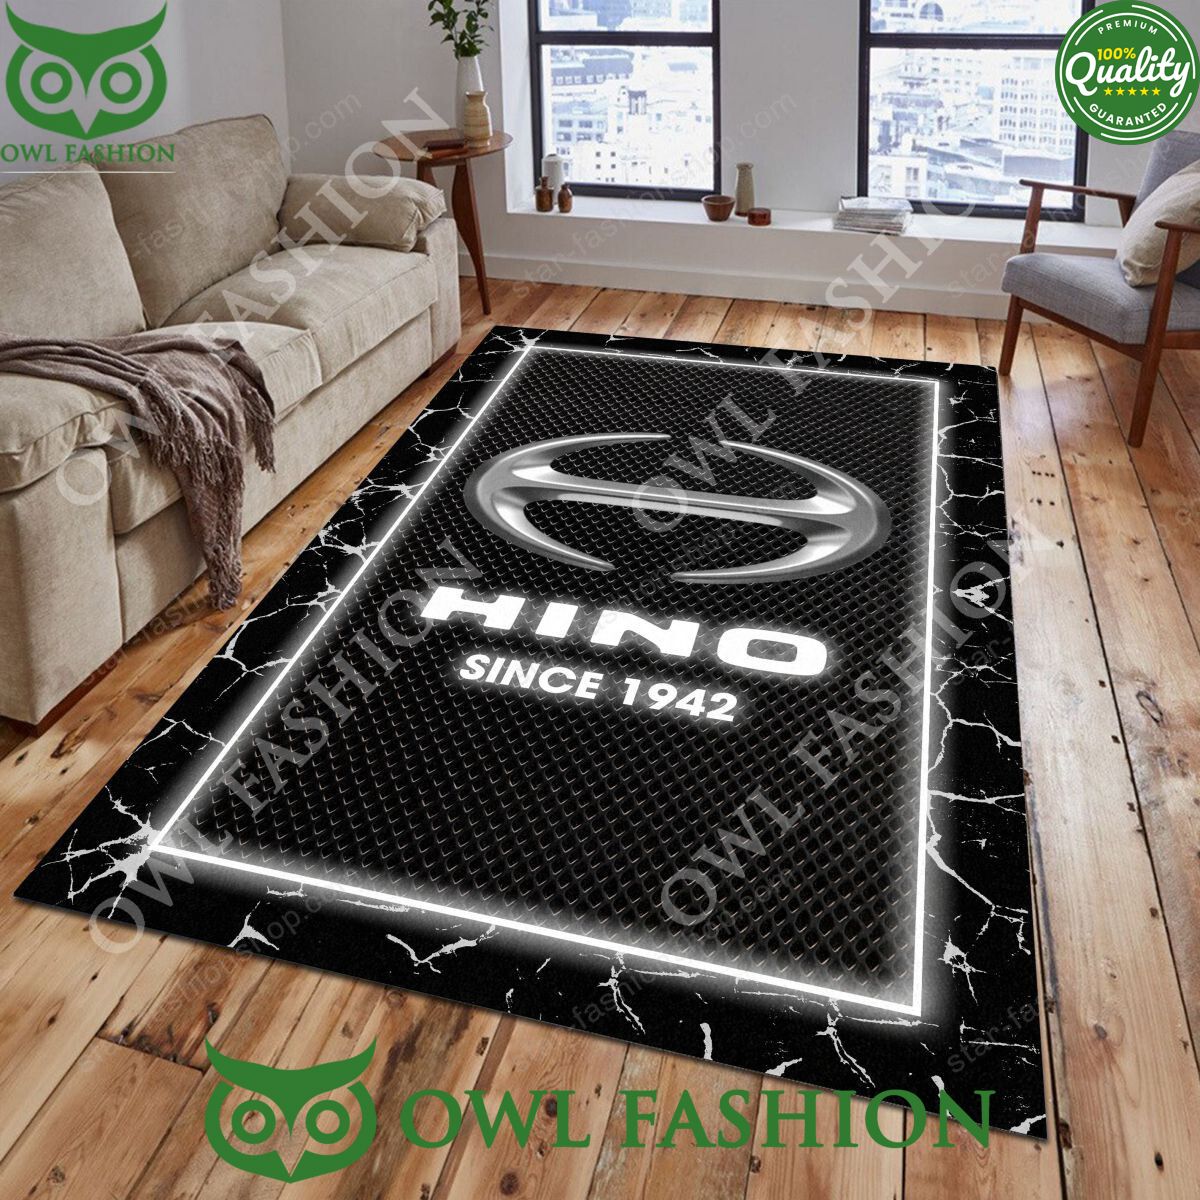 Hino Japanese commercial vehicles diesel engines Rug Carpet Decor Living Room